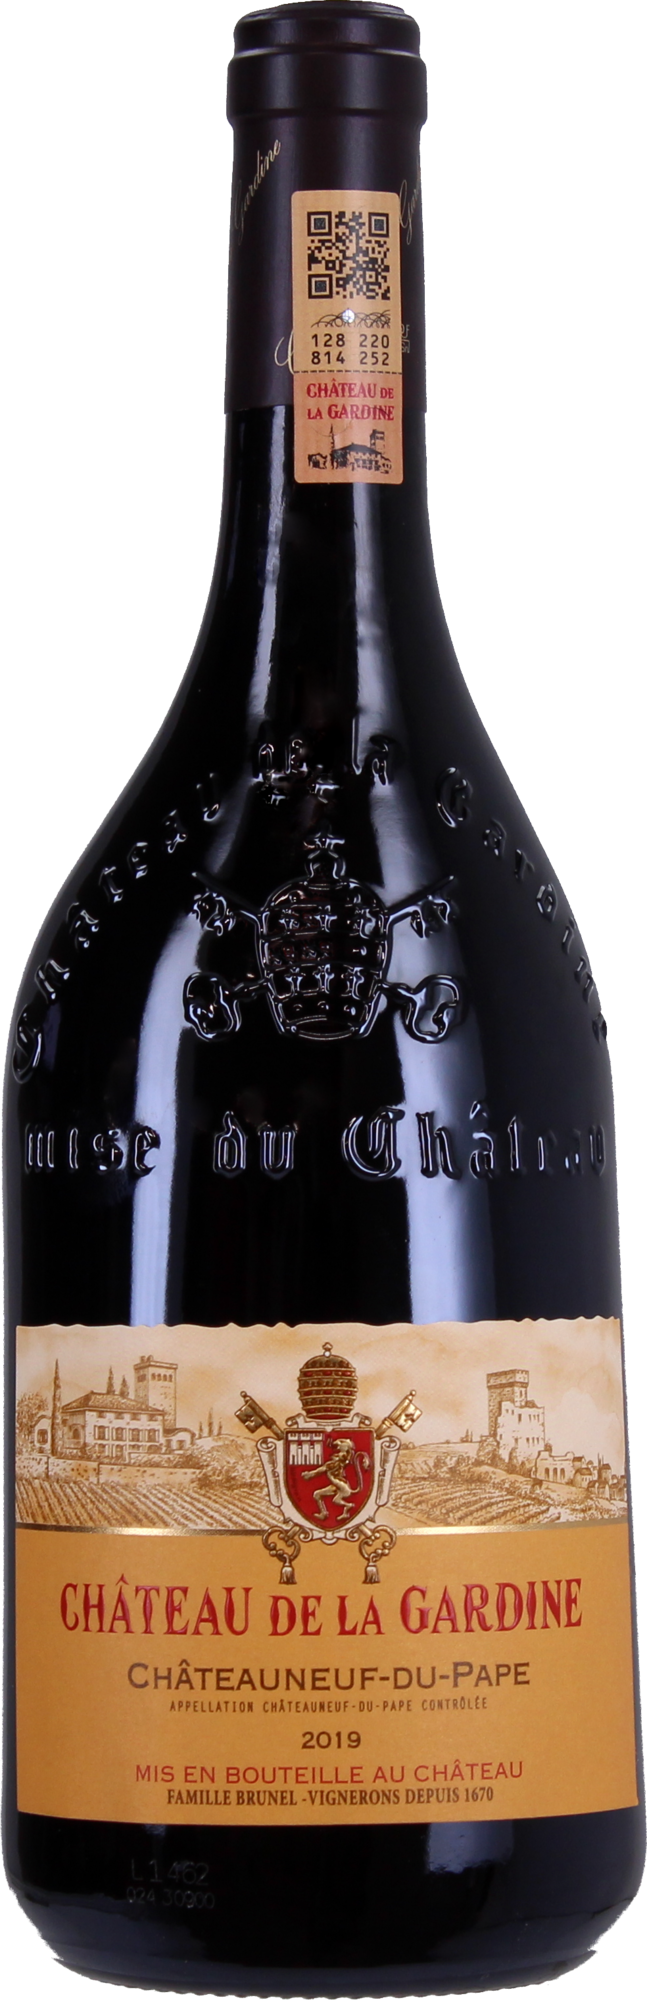 2017 CHATEAUNEUF DU PAPE ROUGE "Tradition"